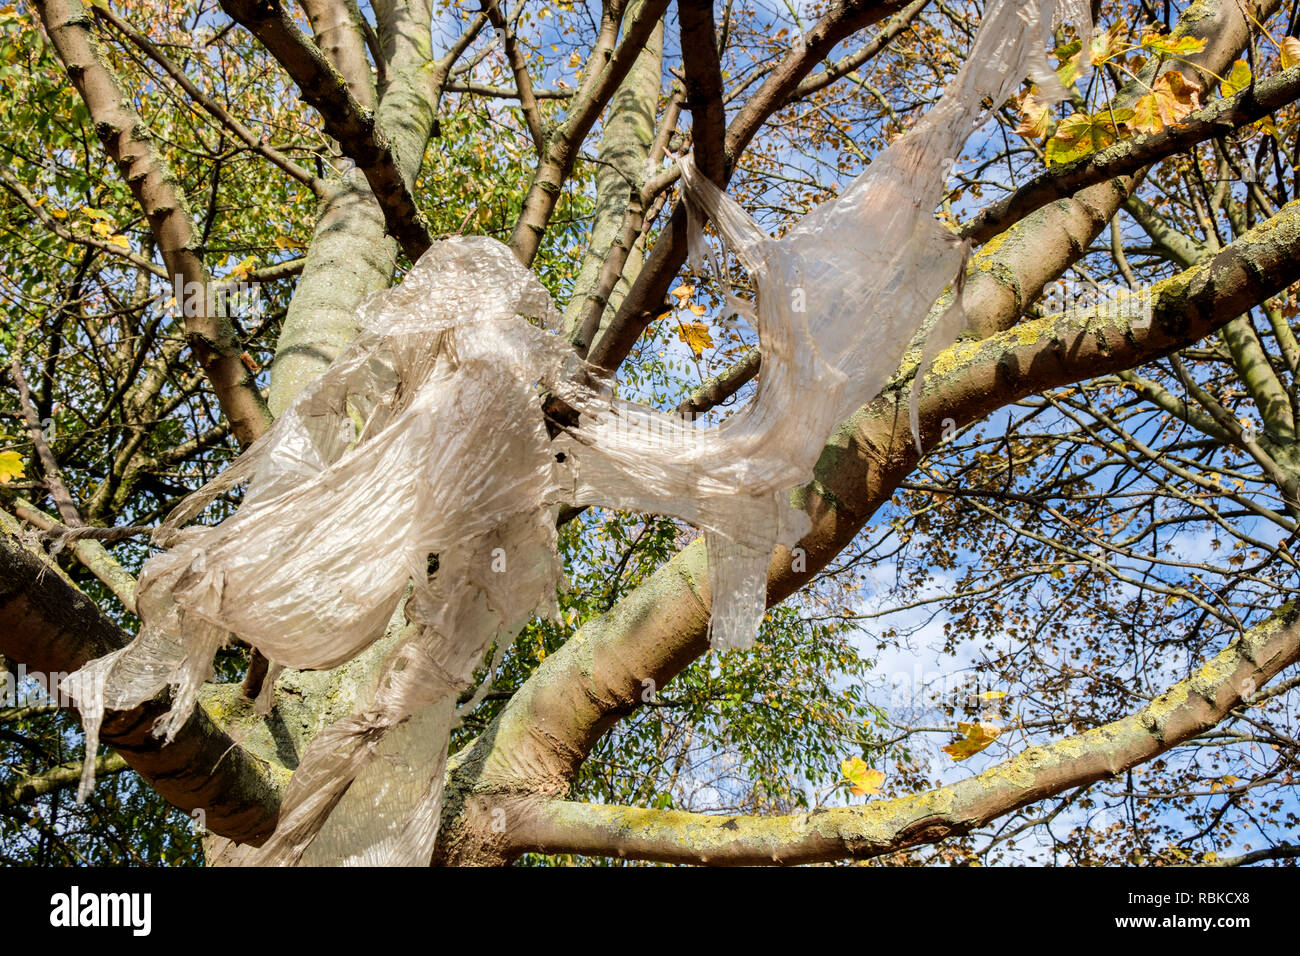 Plastic waste. Plastic sheeting caught on branches in a tree creating environmental pollution, Nottingham, England, UK Stock Photo